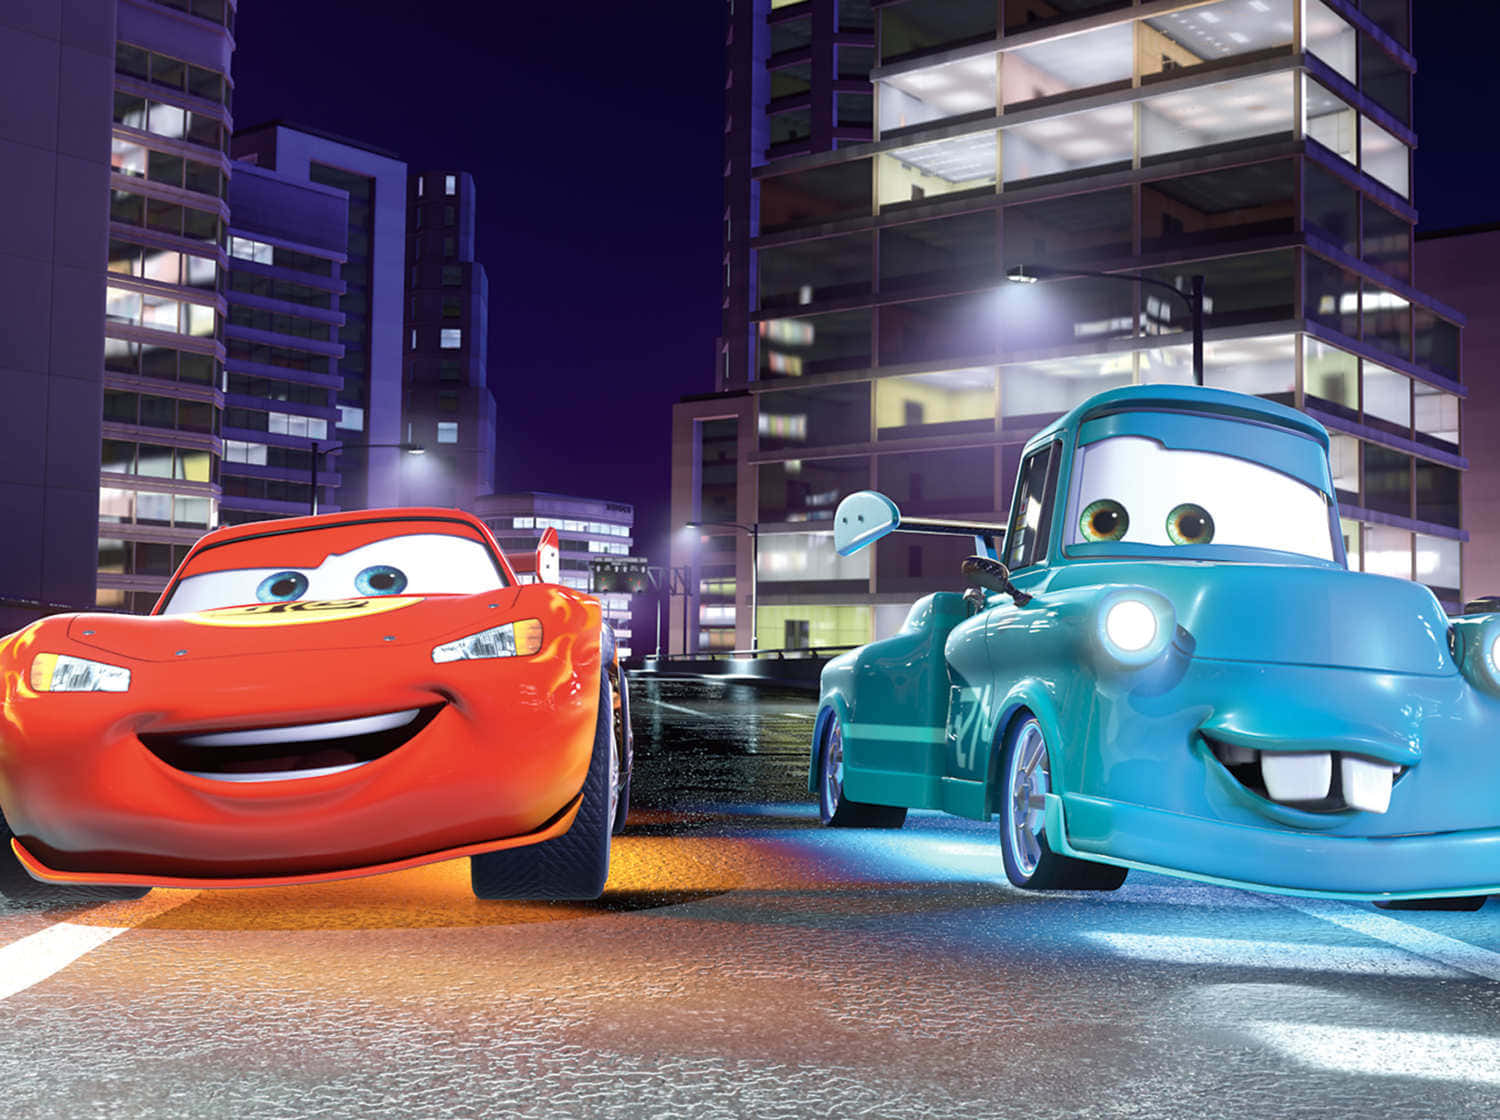 Mater and Lightning McQueen, Friends Through the Test of Time